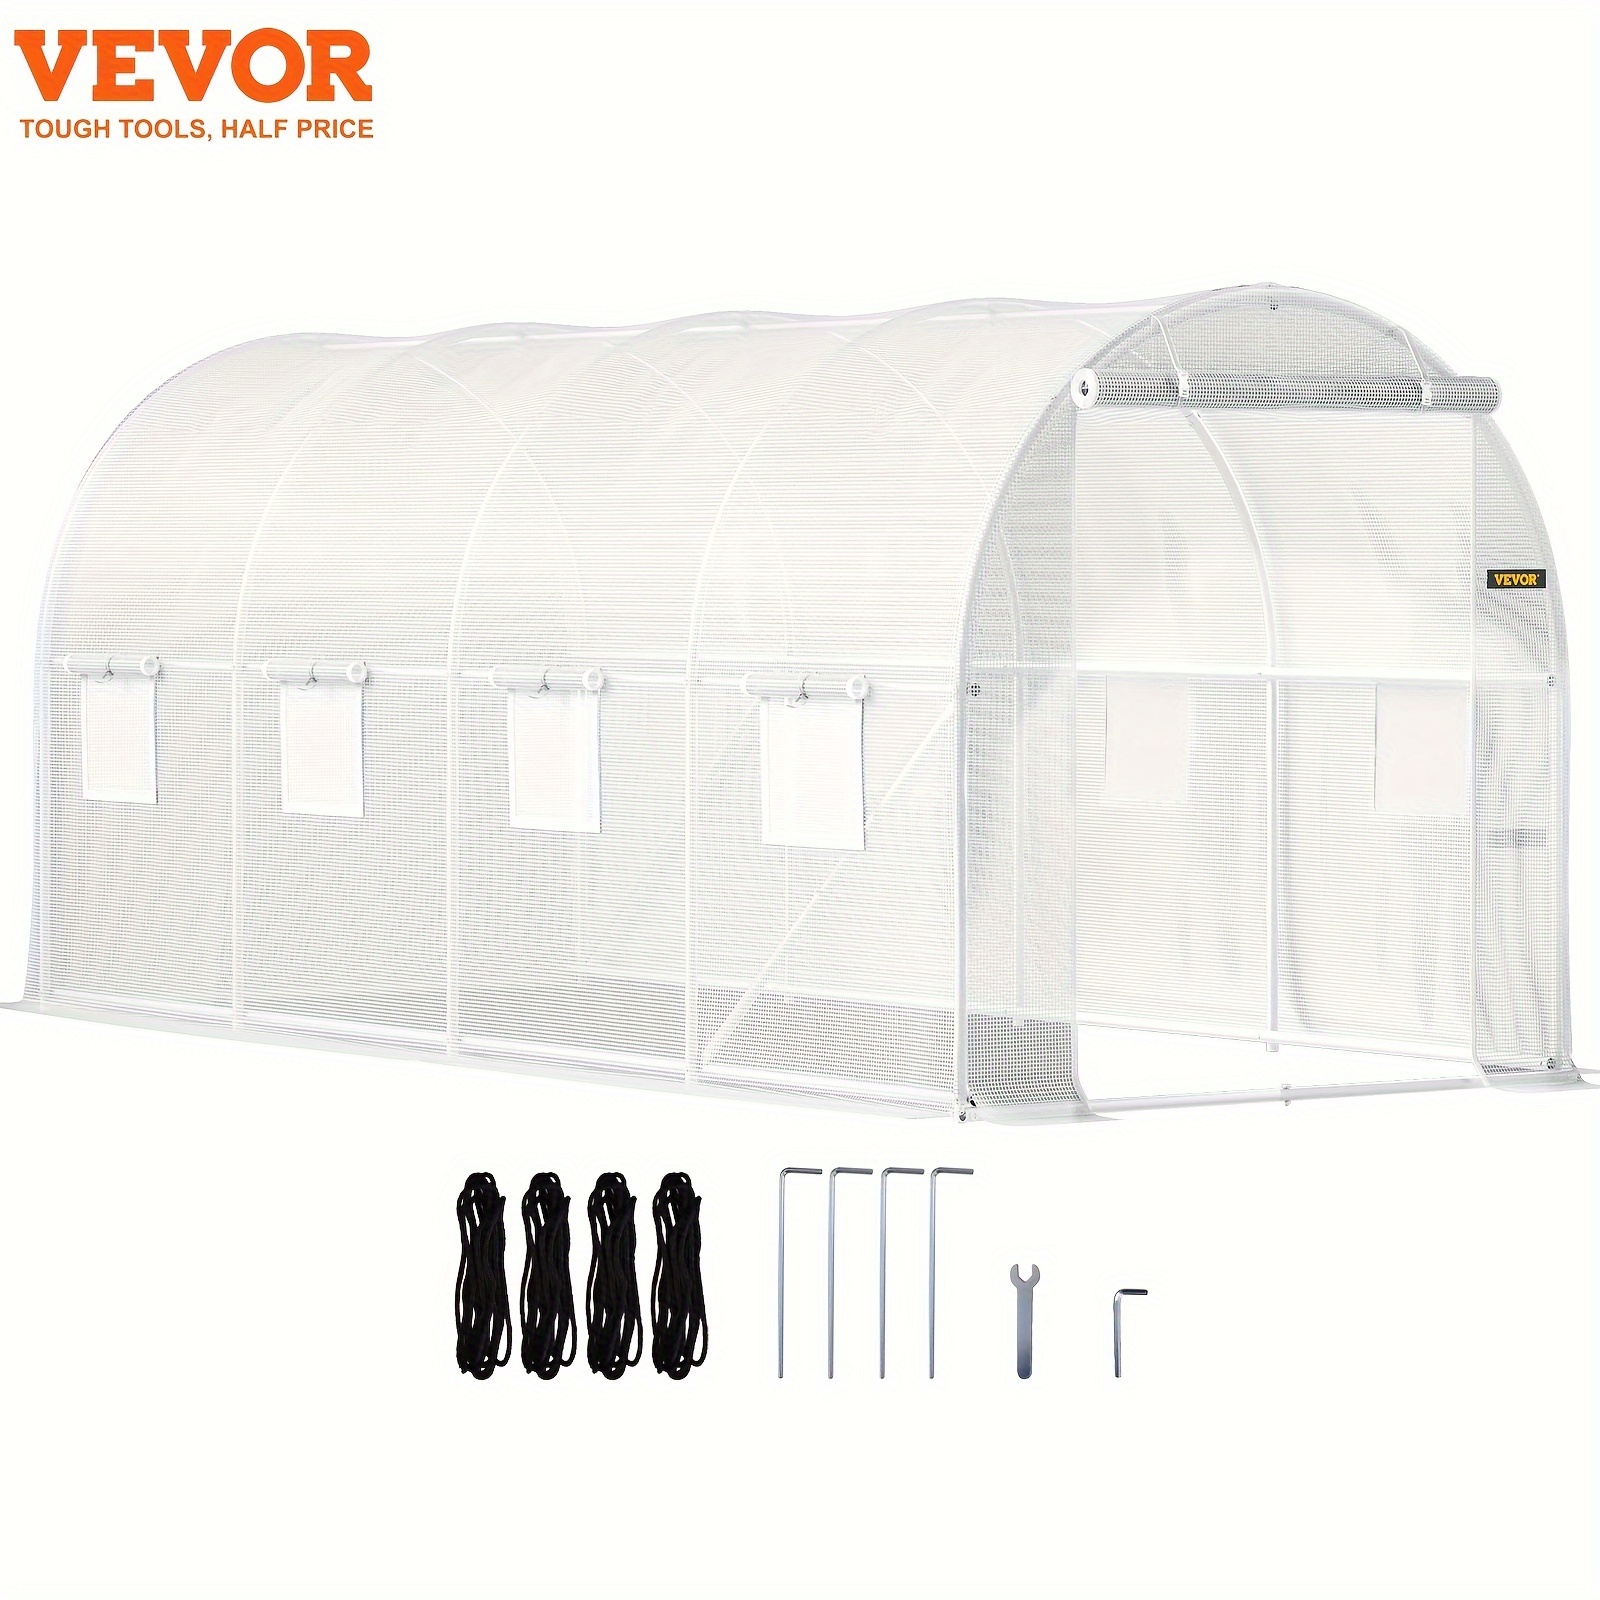 

Walk-in Tunnel Greenhouse, 15 X 7 X 7 Ft Portable Plant Hot House W/ Galvanized Steel Hoops, 1 Top Beam, Diagonal Poles, Zippered Door & 8 Roll-up Windows, White